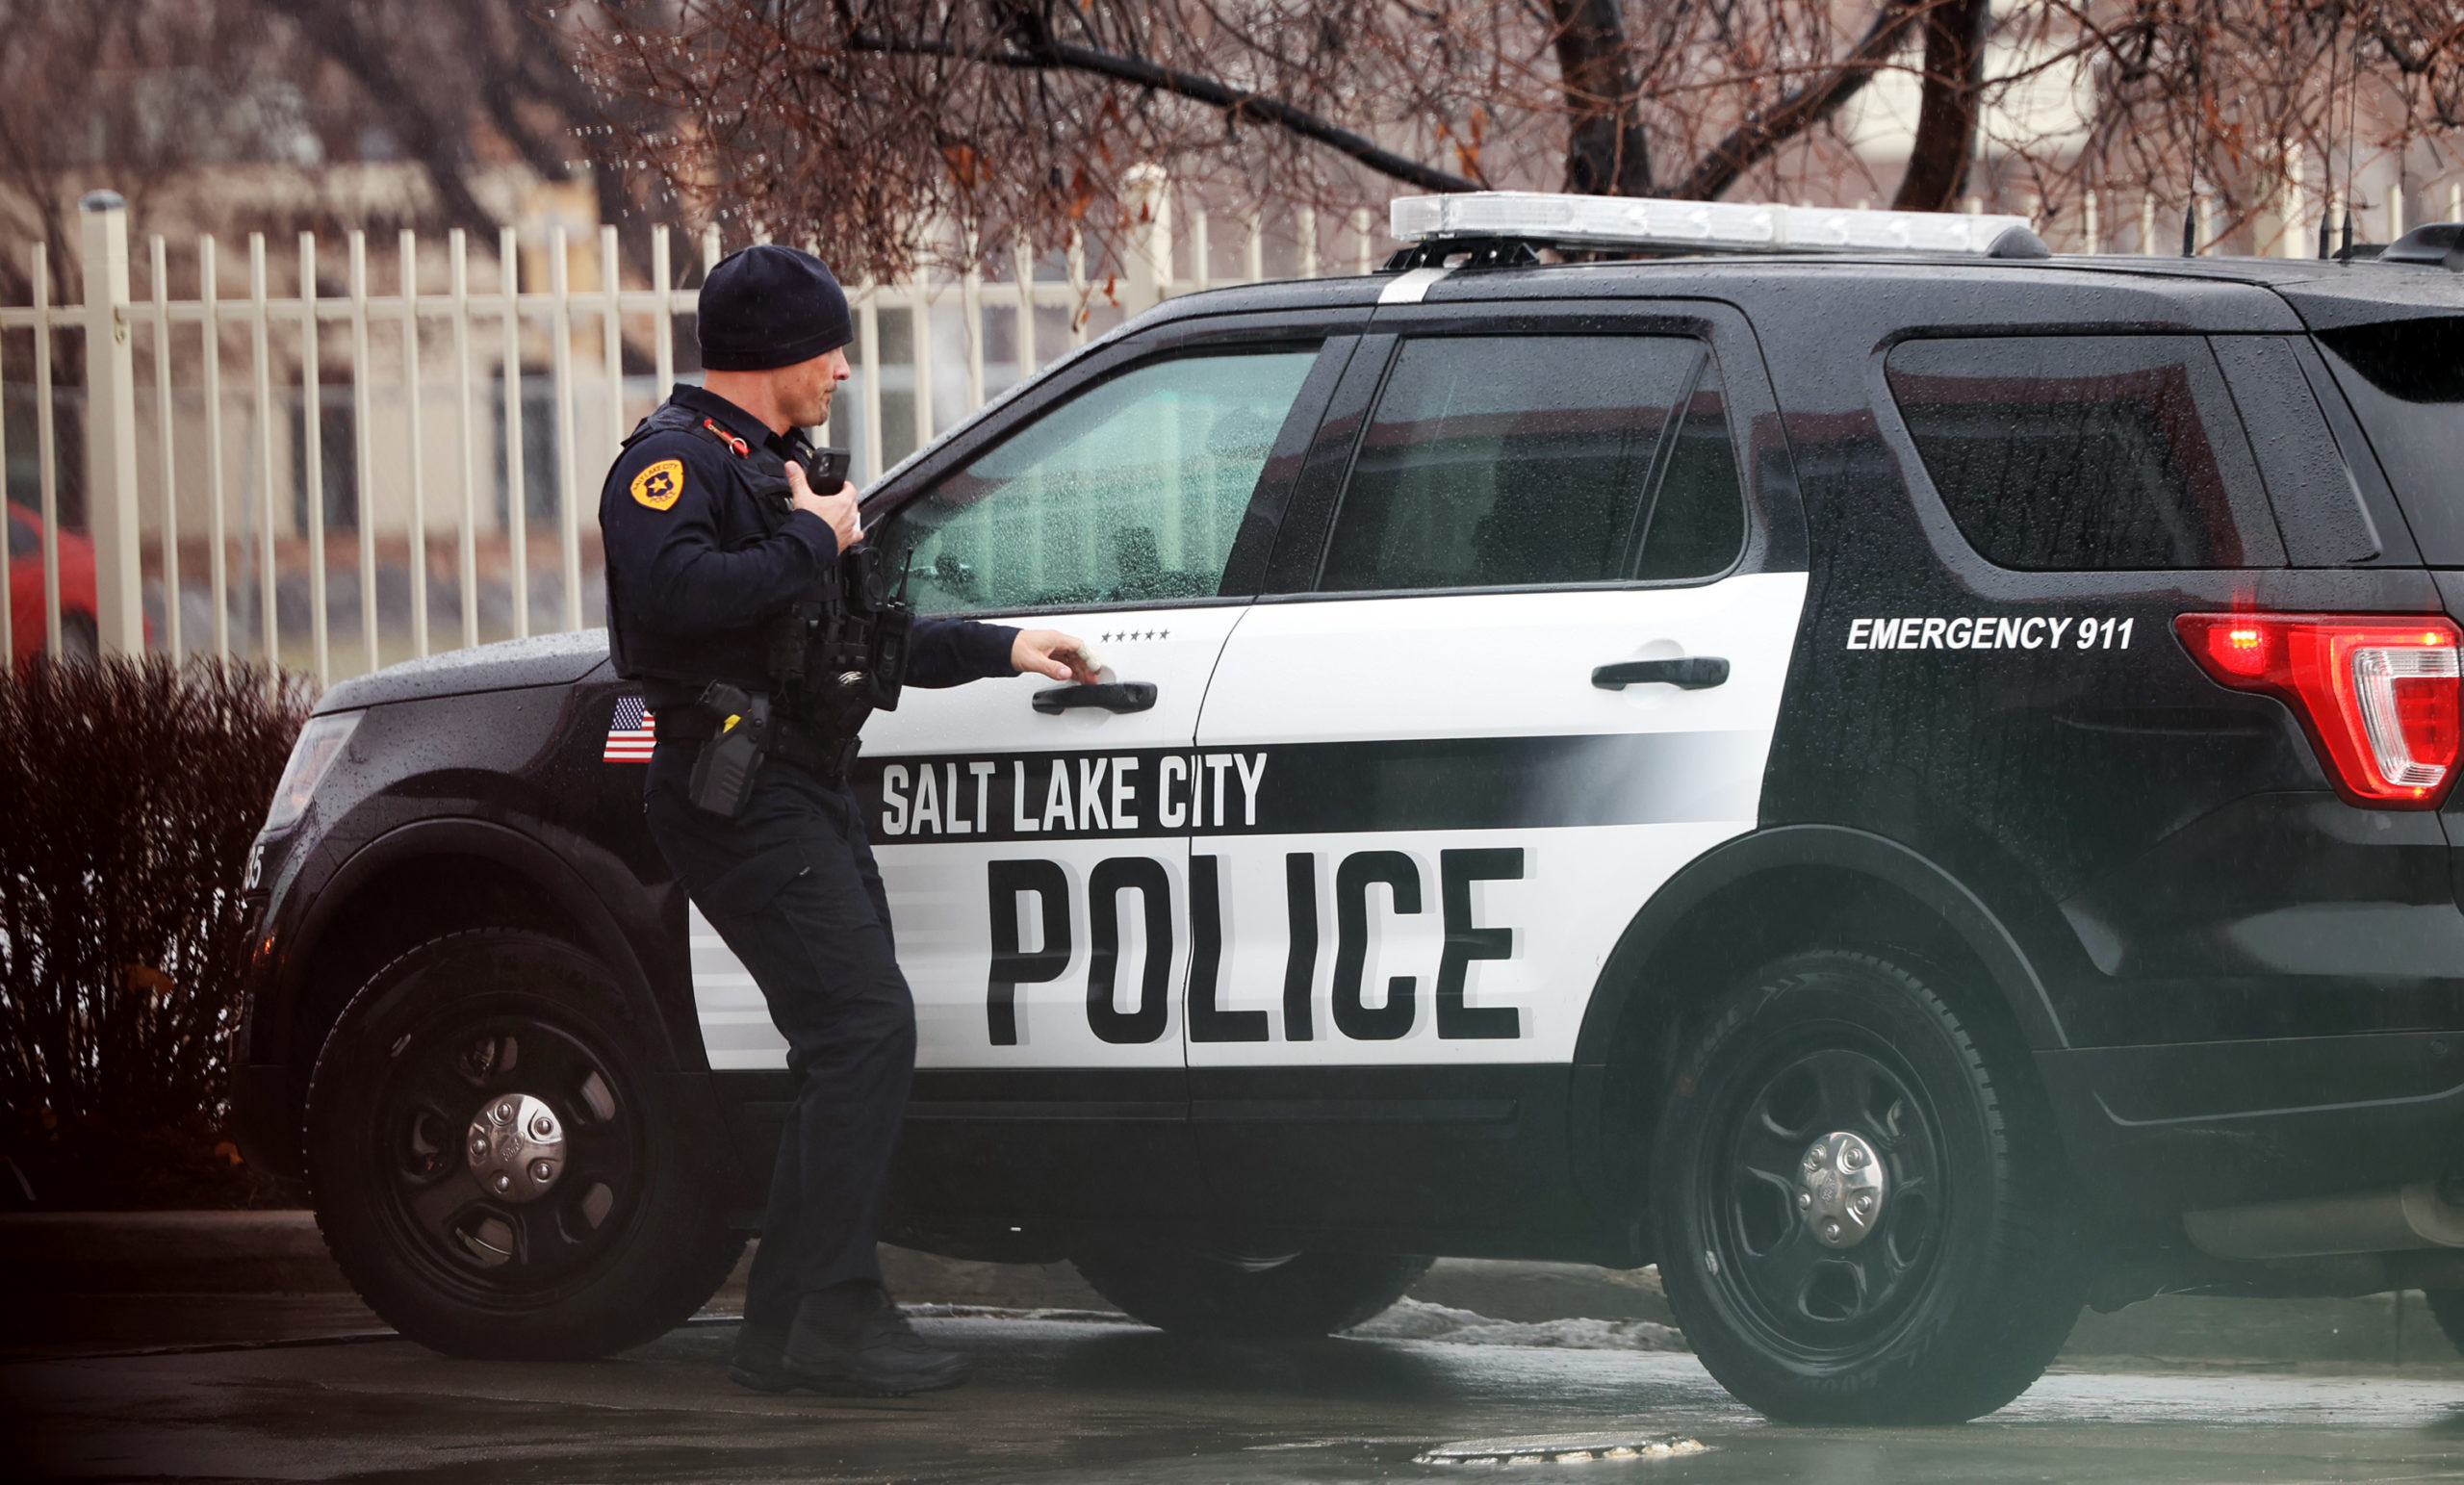 SALT LAKE CITY -- In a Twitter post, SLCPD says they're responding to a shooting near 100 South Sta...